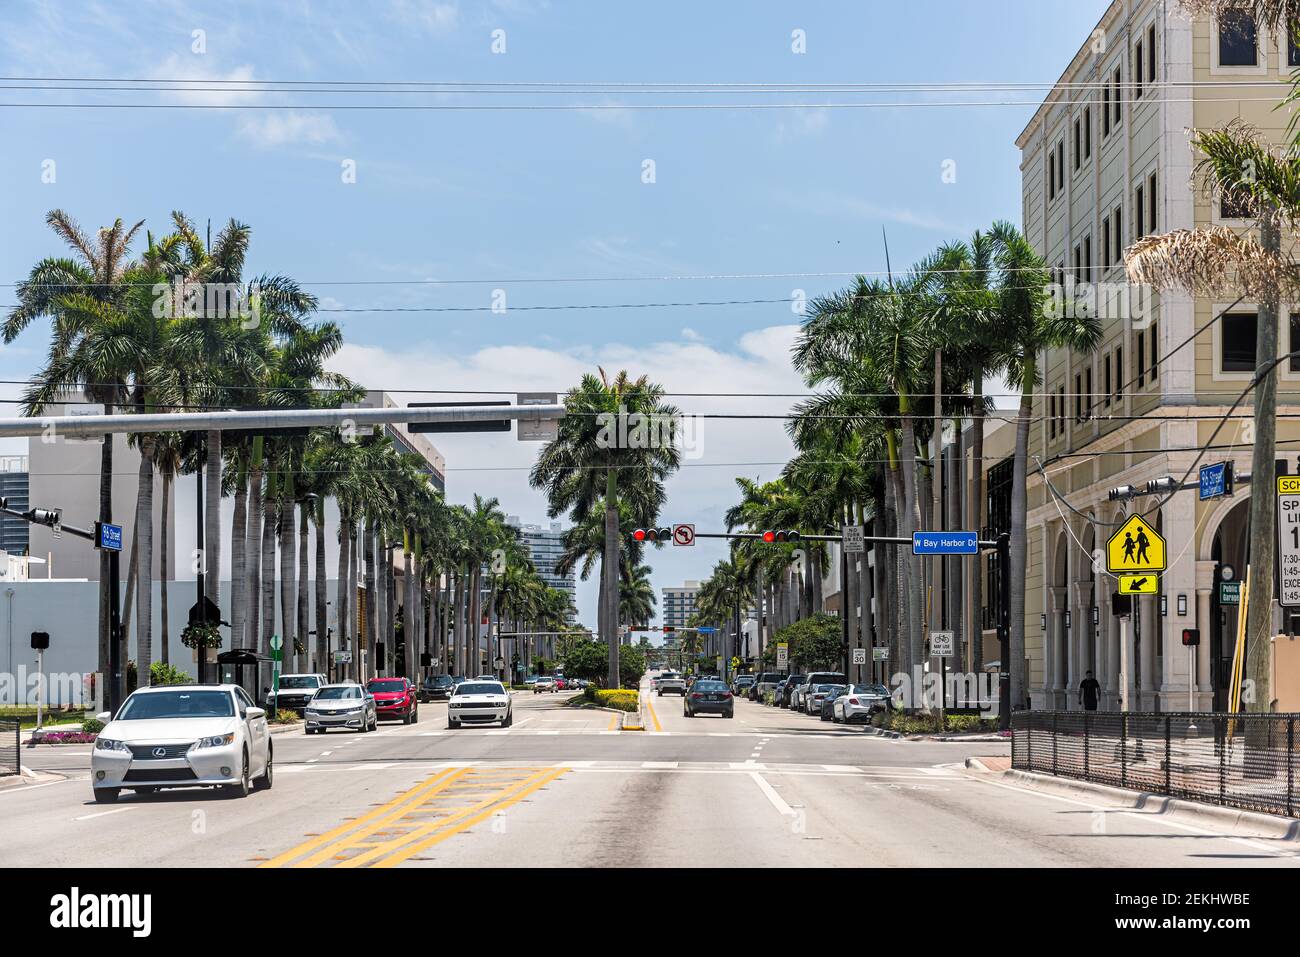 Bay Harbor Islands, USA - May 8, 2018: Intersection of 96 street and West Bay Harbor drive in Miami Dade county, Florida with people walking and cars Stock Photo